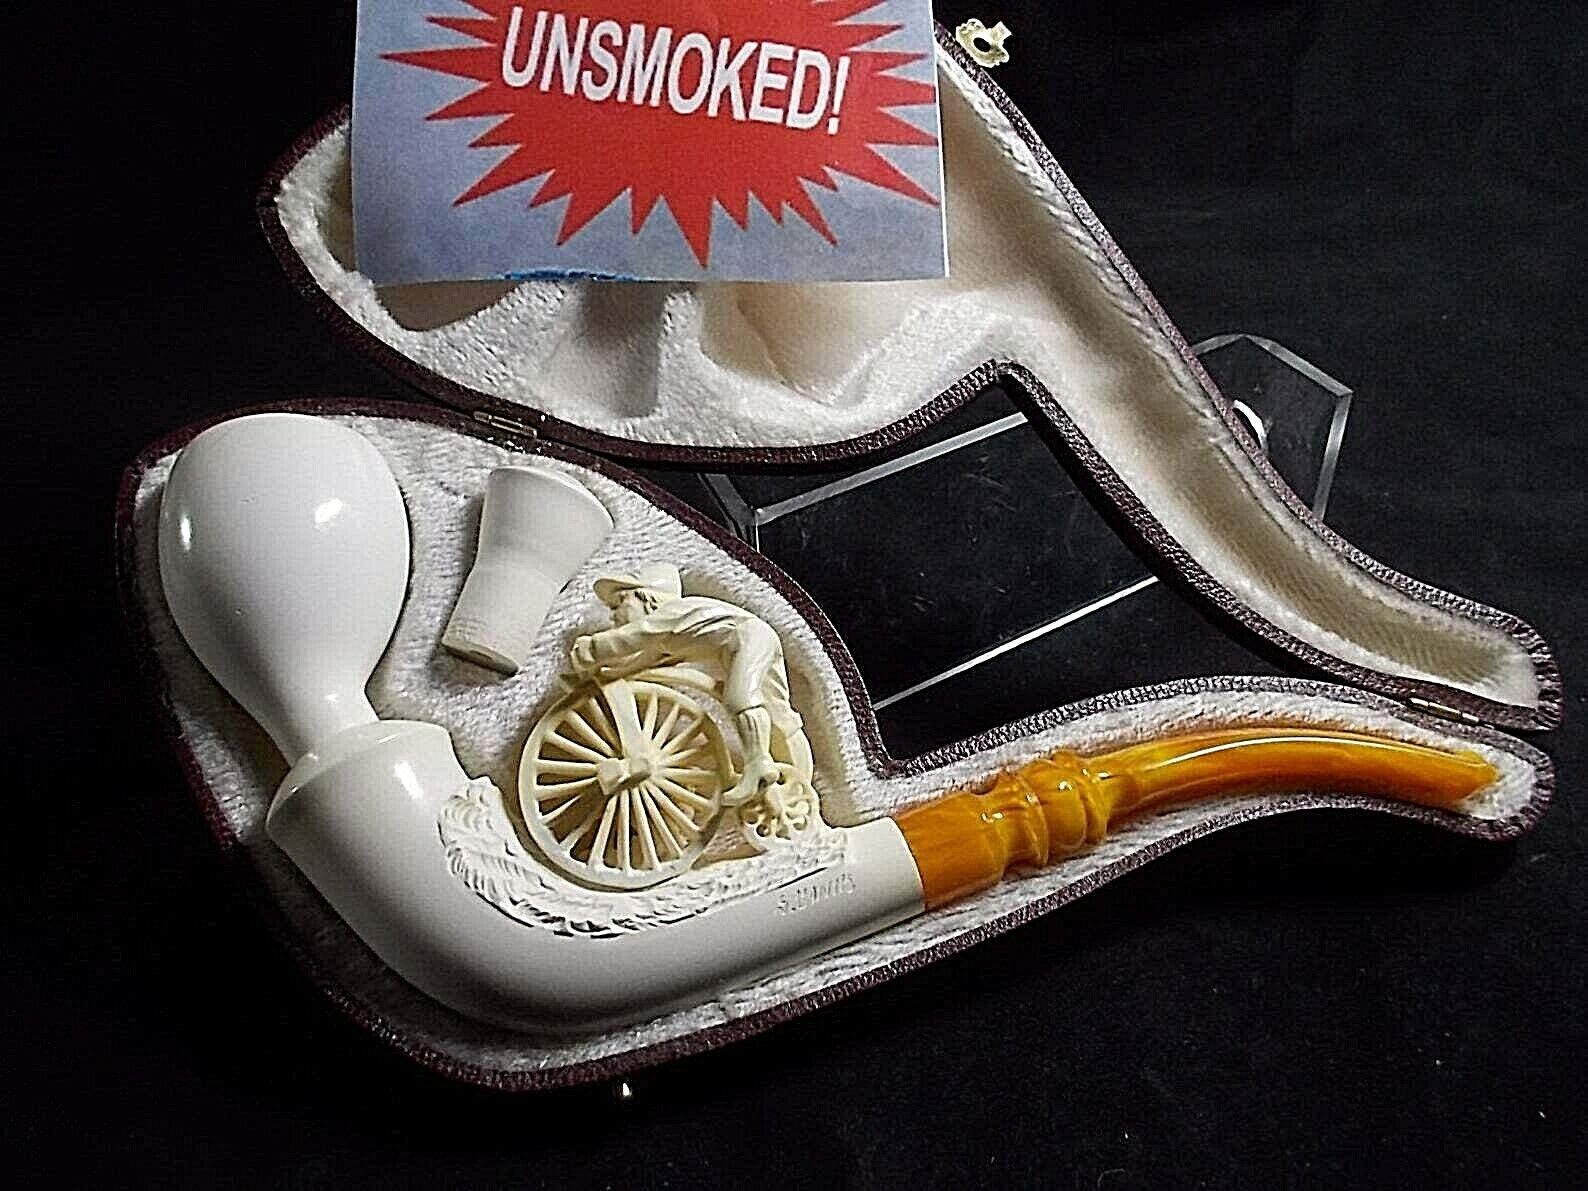 🔴UNSMOKED S. YANIK MEERSCHAUM PIPE Featuring a Man on an Old Fashioned Bicycle